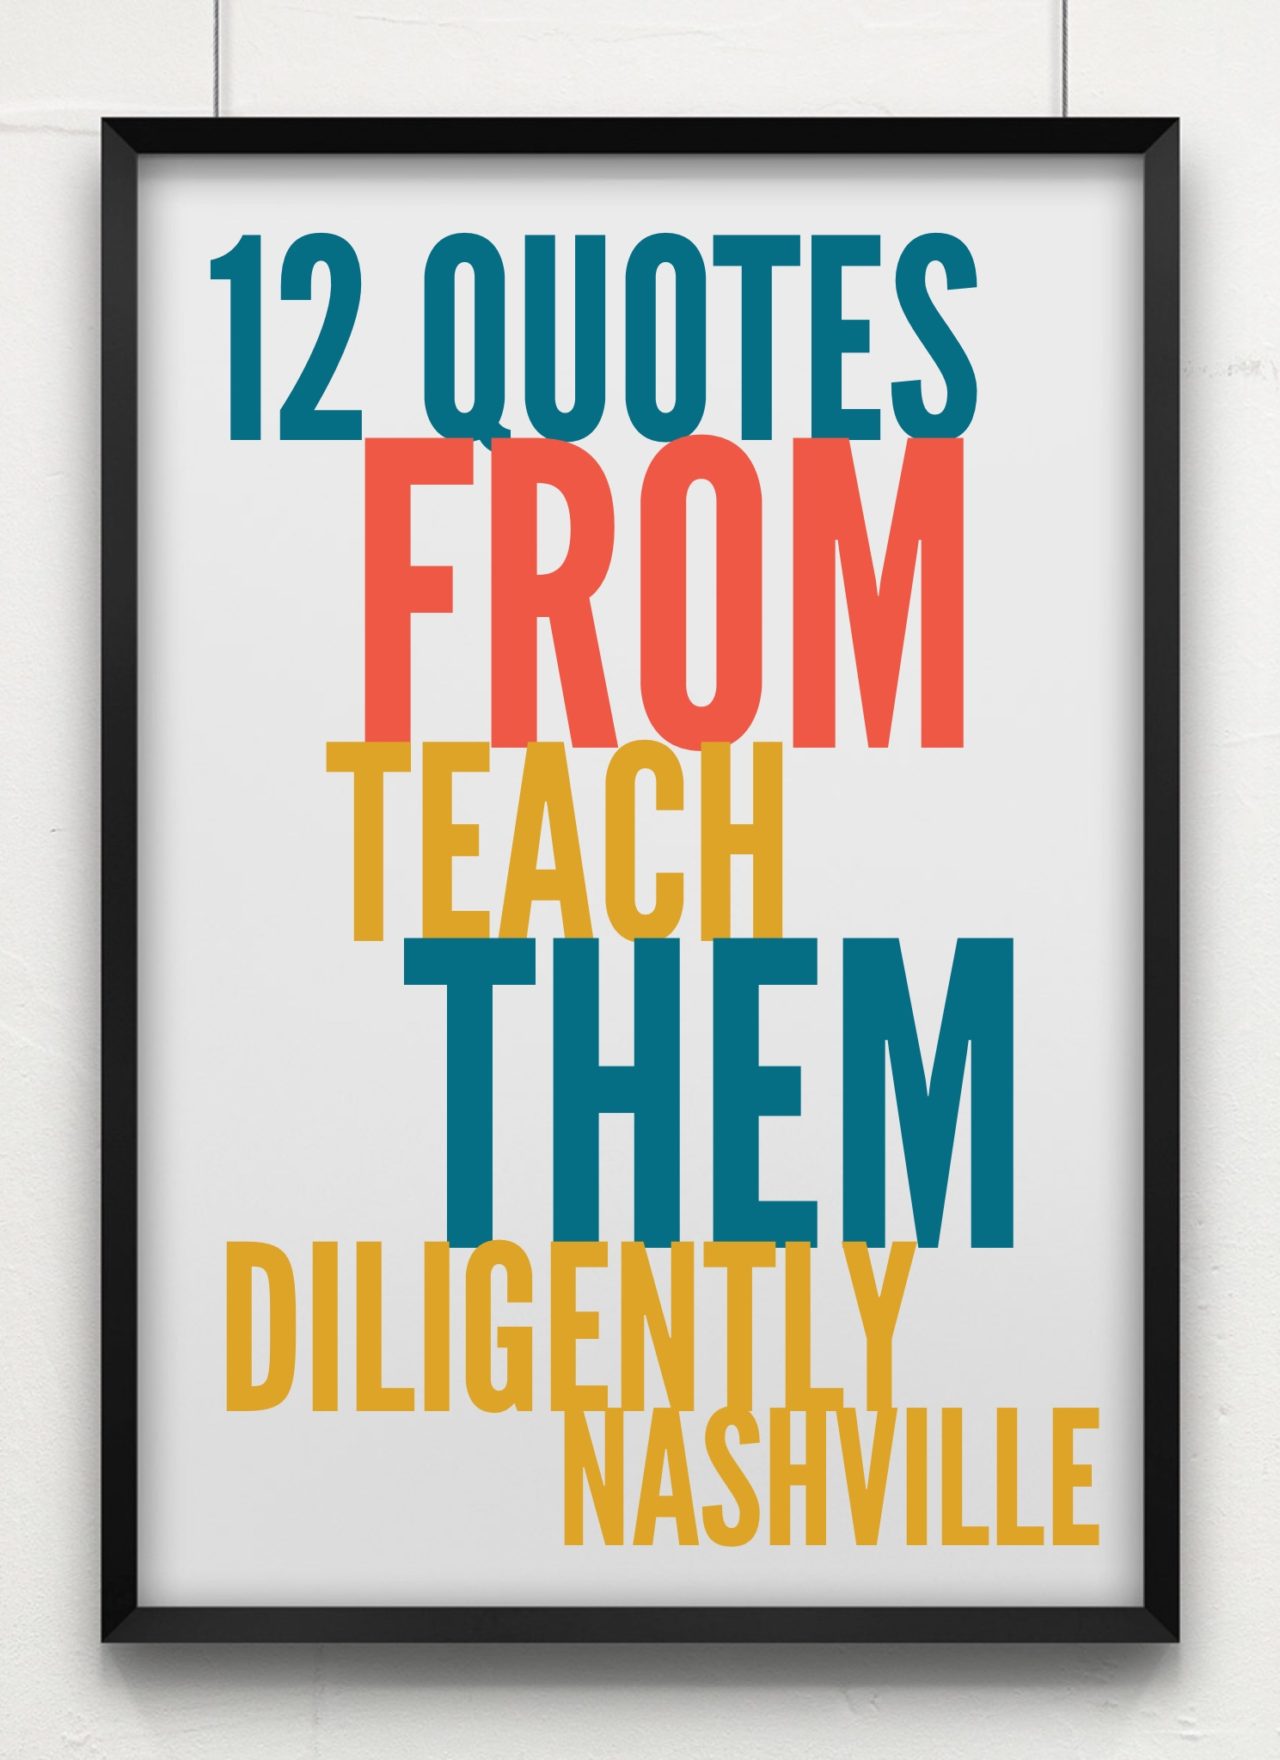 12 Quotes From Teach Them Diligently Nashville